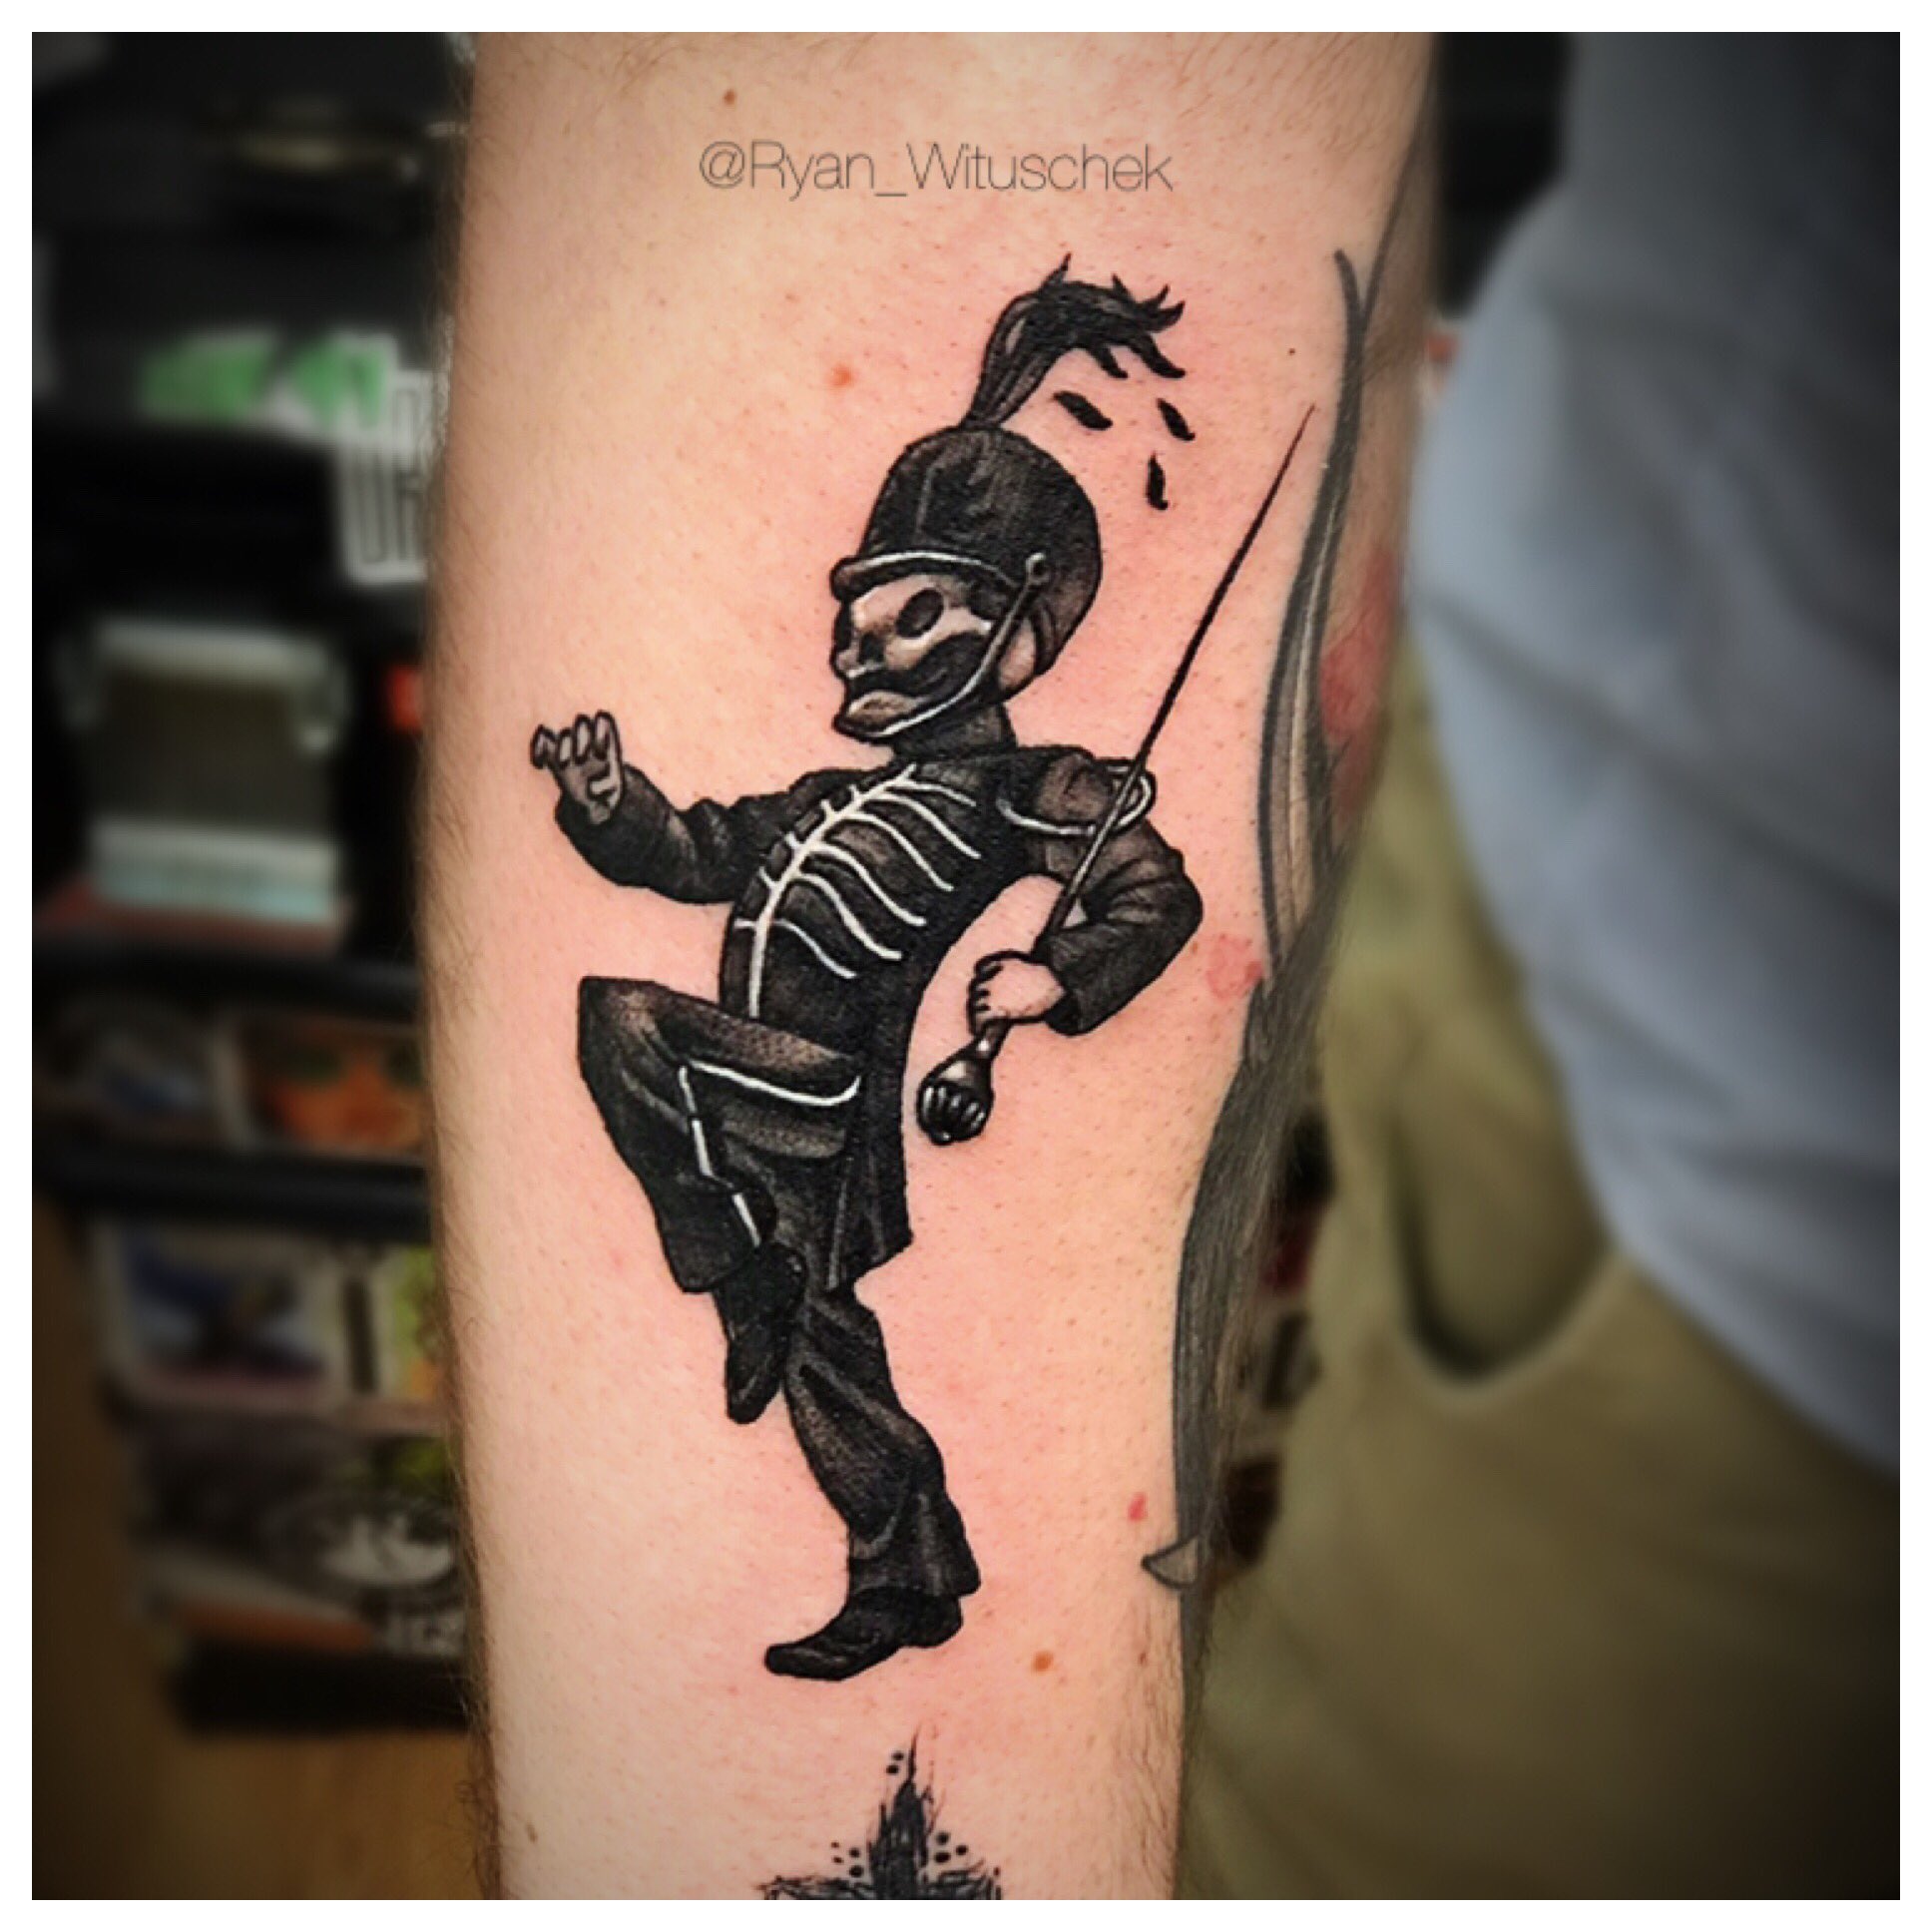 The Integrity Tattoo Lounge  By alexsesumtattoo  My chemical romance marching  band done today for josh Thank you very much     tattoo tattoos  tattooart tattooartist mcr mychemicalromance music 